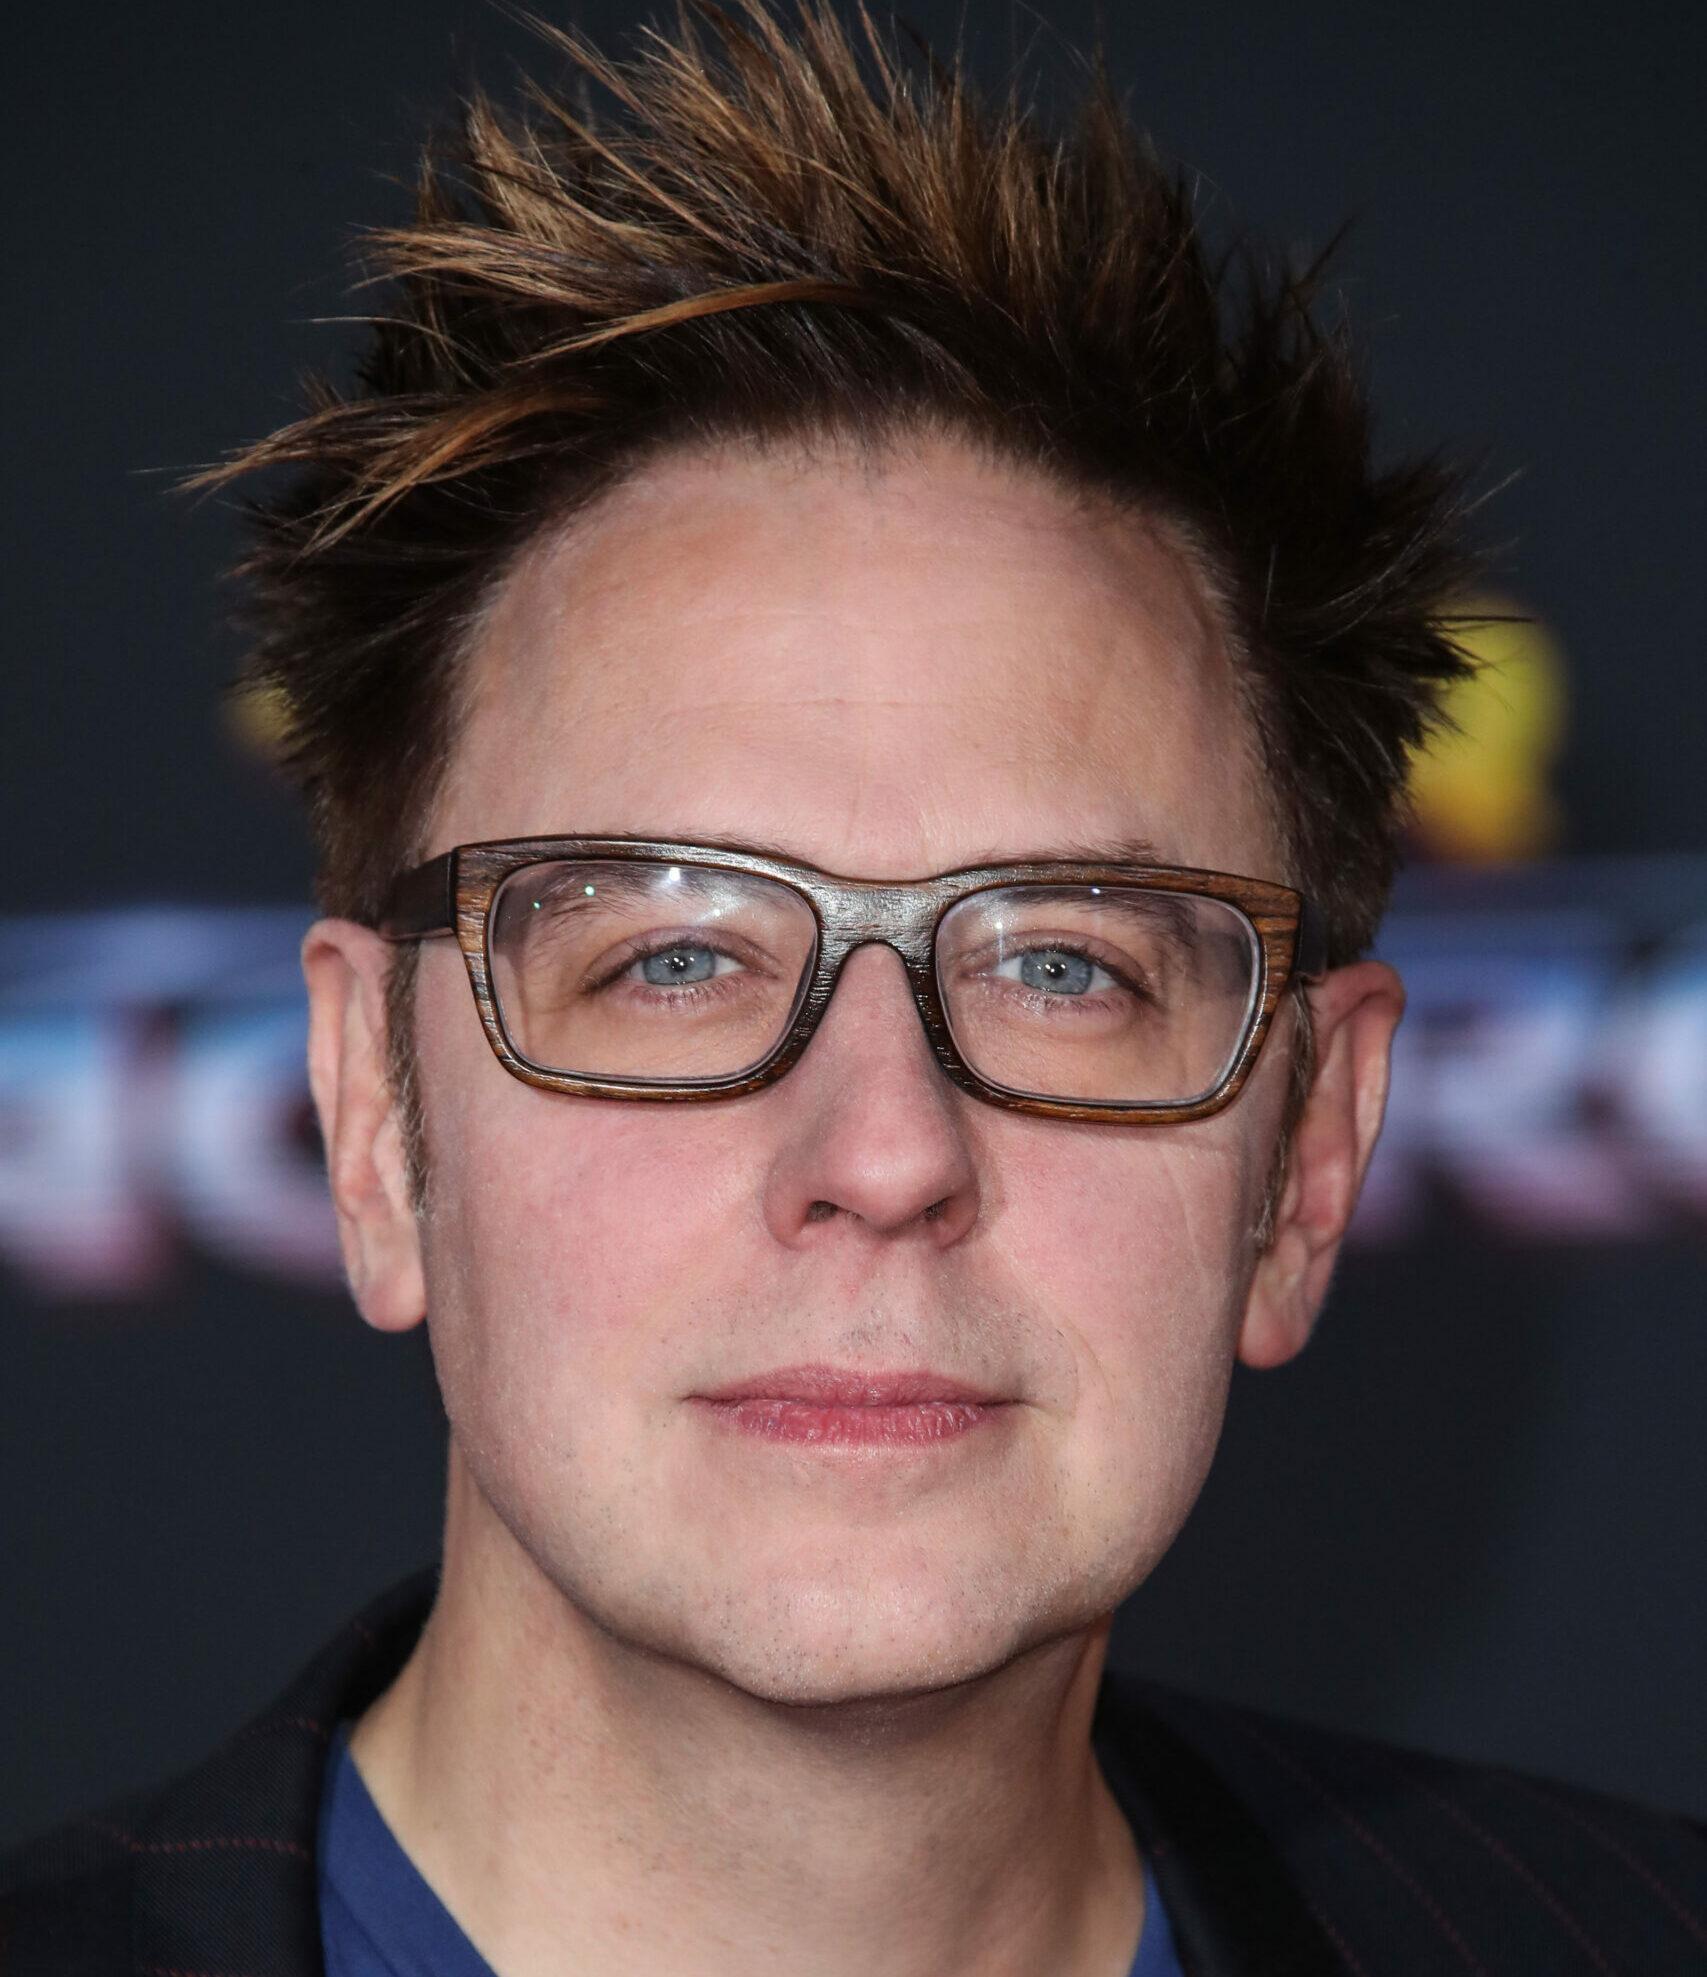 Los Angeles Premiere Of Disney And Marvel's 'Thor: Ragnarok' held at the El Capitan Theatre on October 10, 2017 in Hollywood, Los Angeles, California, United States. 10 Oct 2017 Pictured: James Gunn.